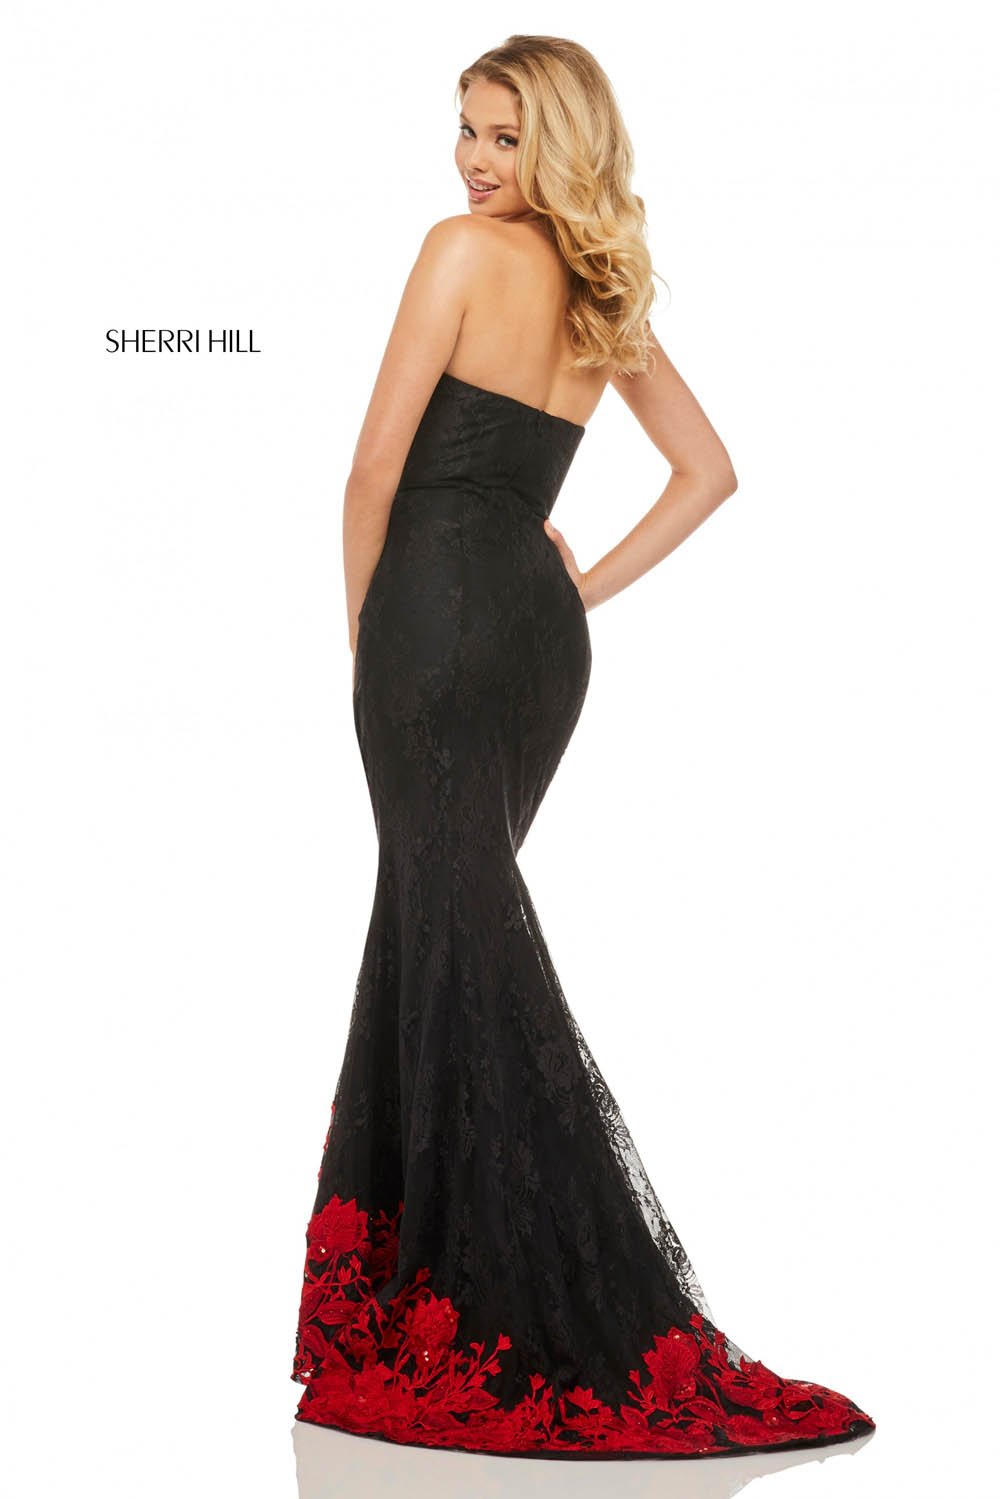 Sherri Hill 52876 dress images in these colors: Black Red.